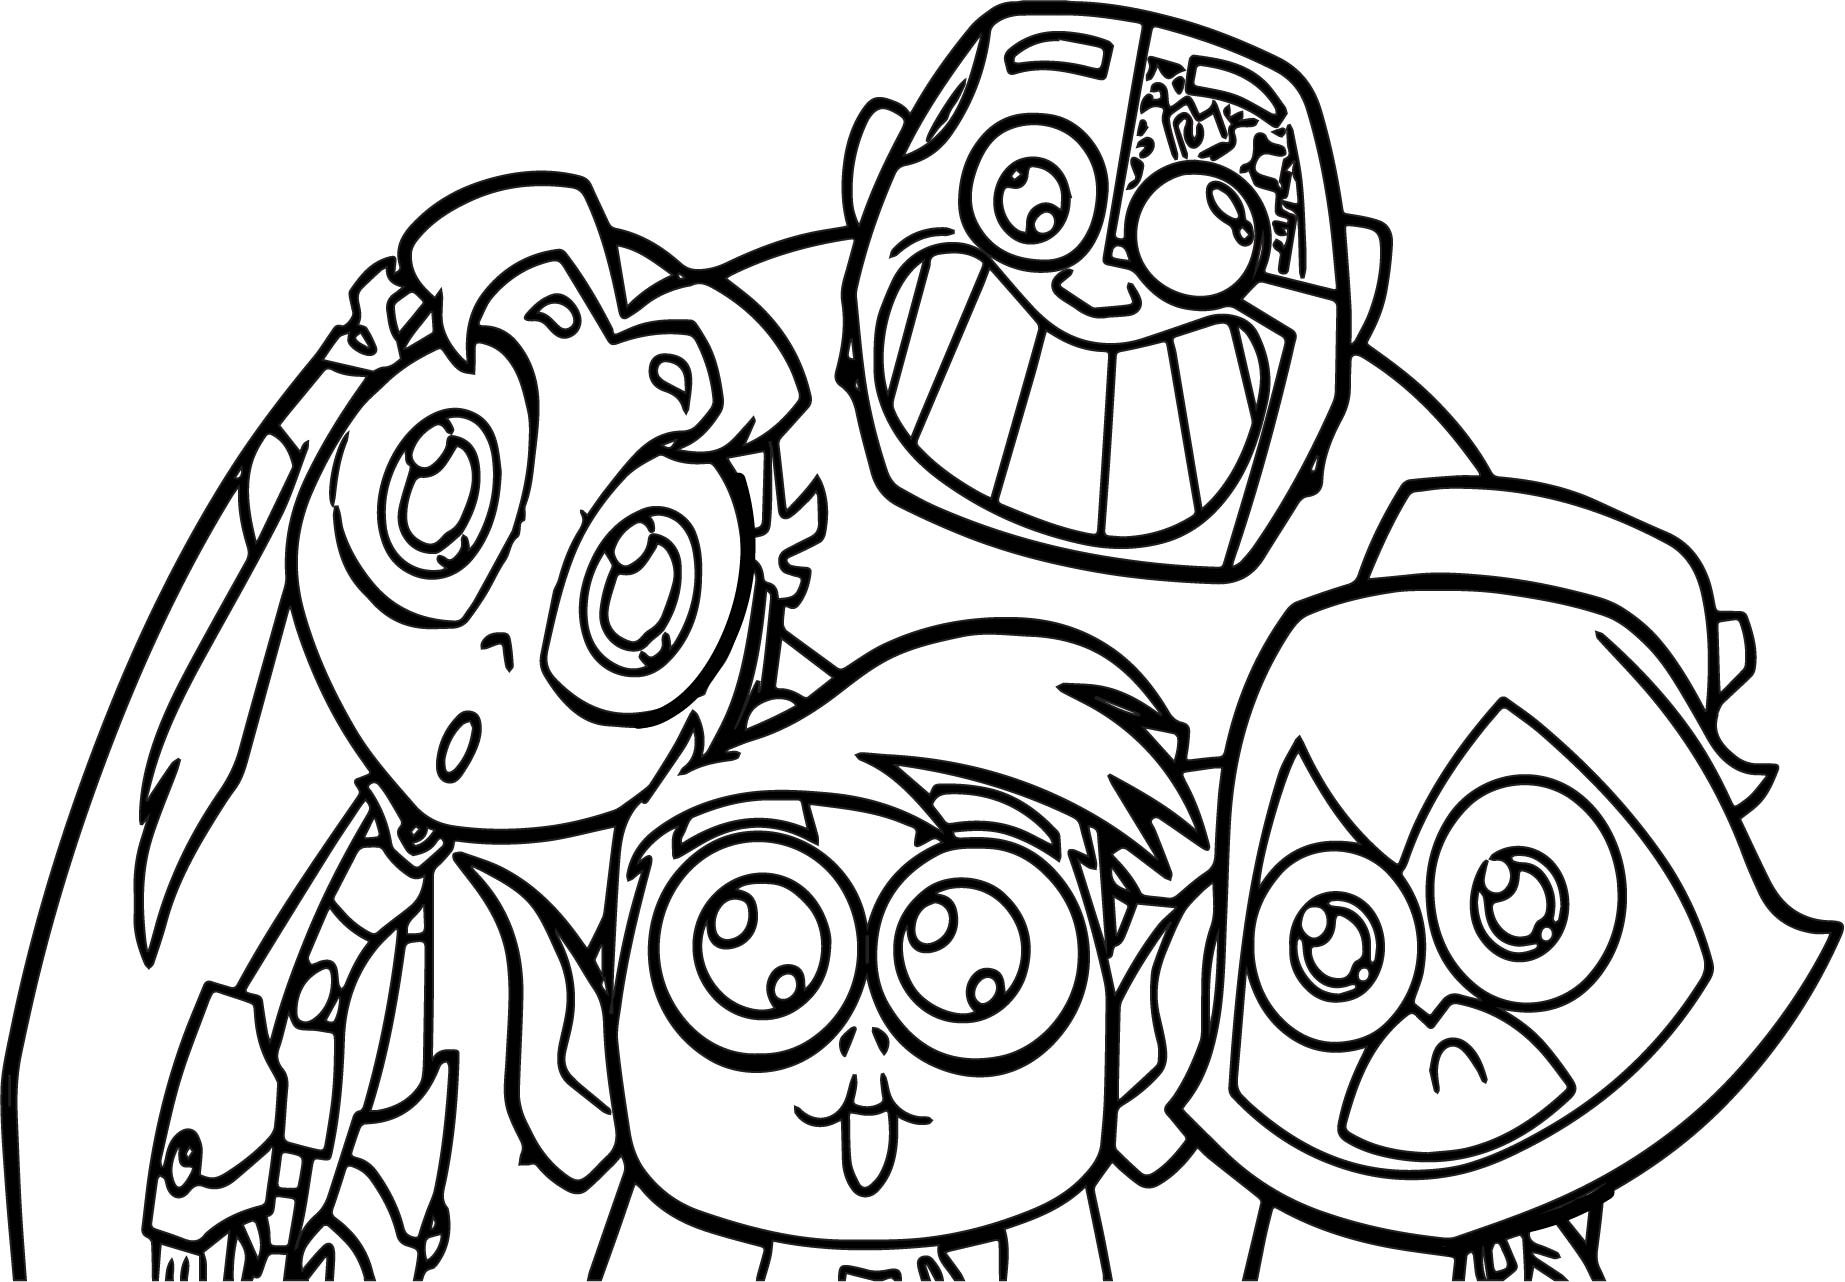 Movie Coloring Pages For Boys
 Teen Titans Coloring Pages Best Coloring Pages For Kids